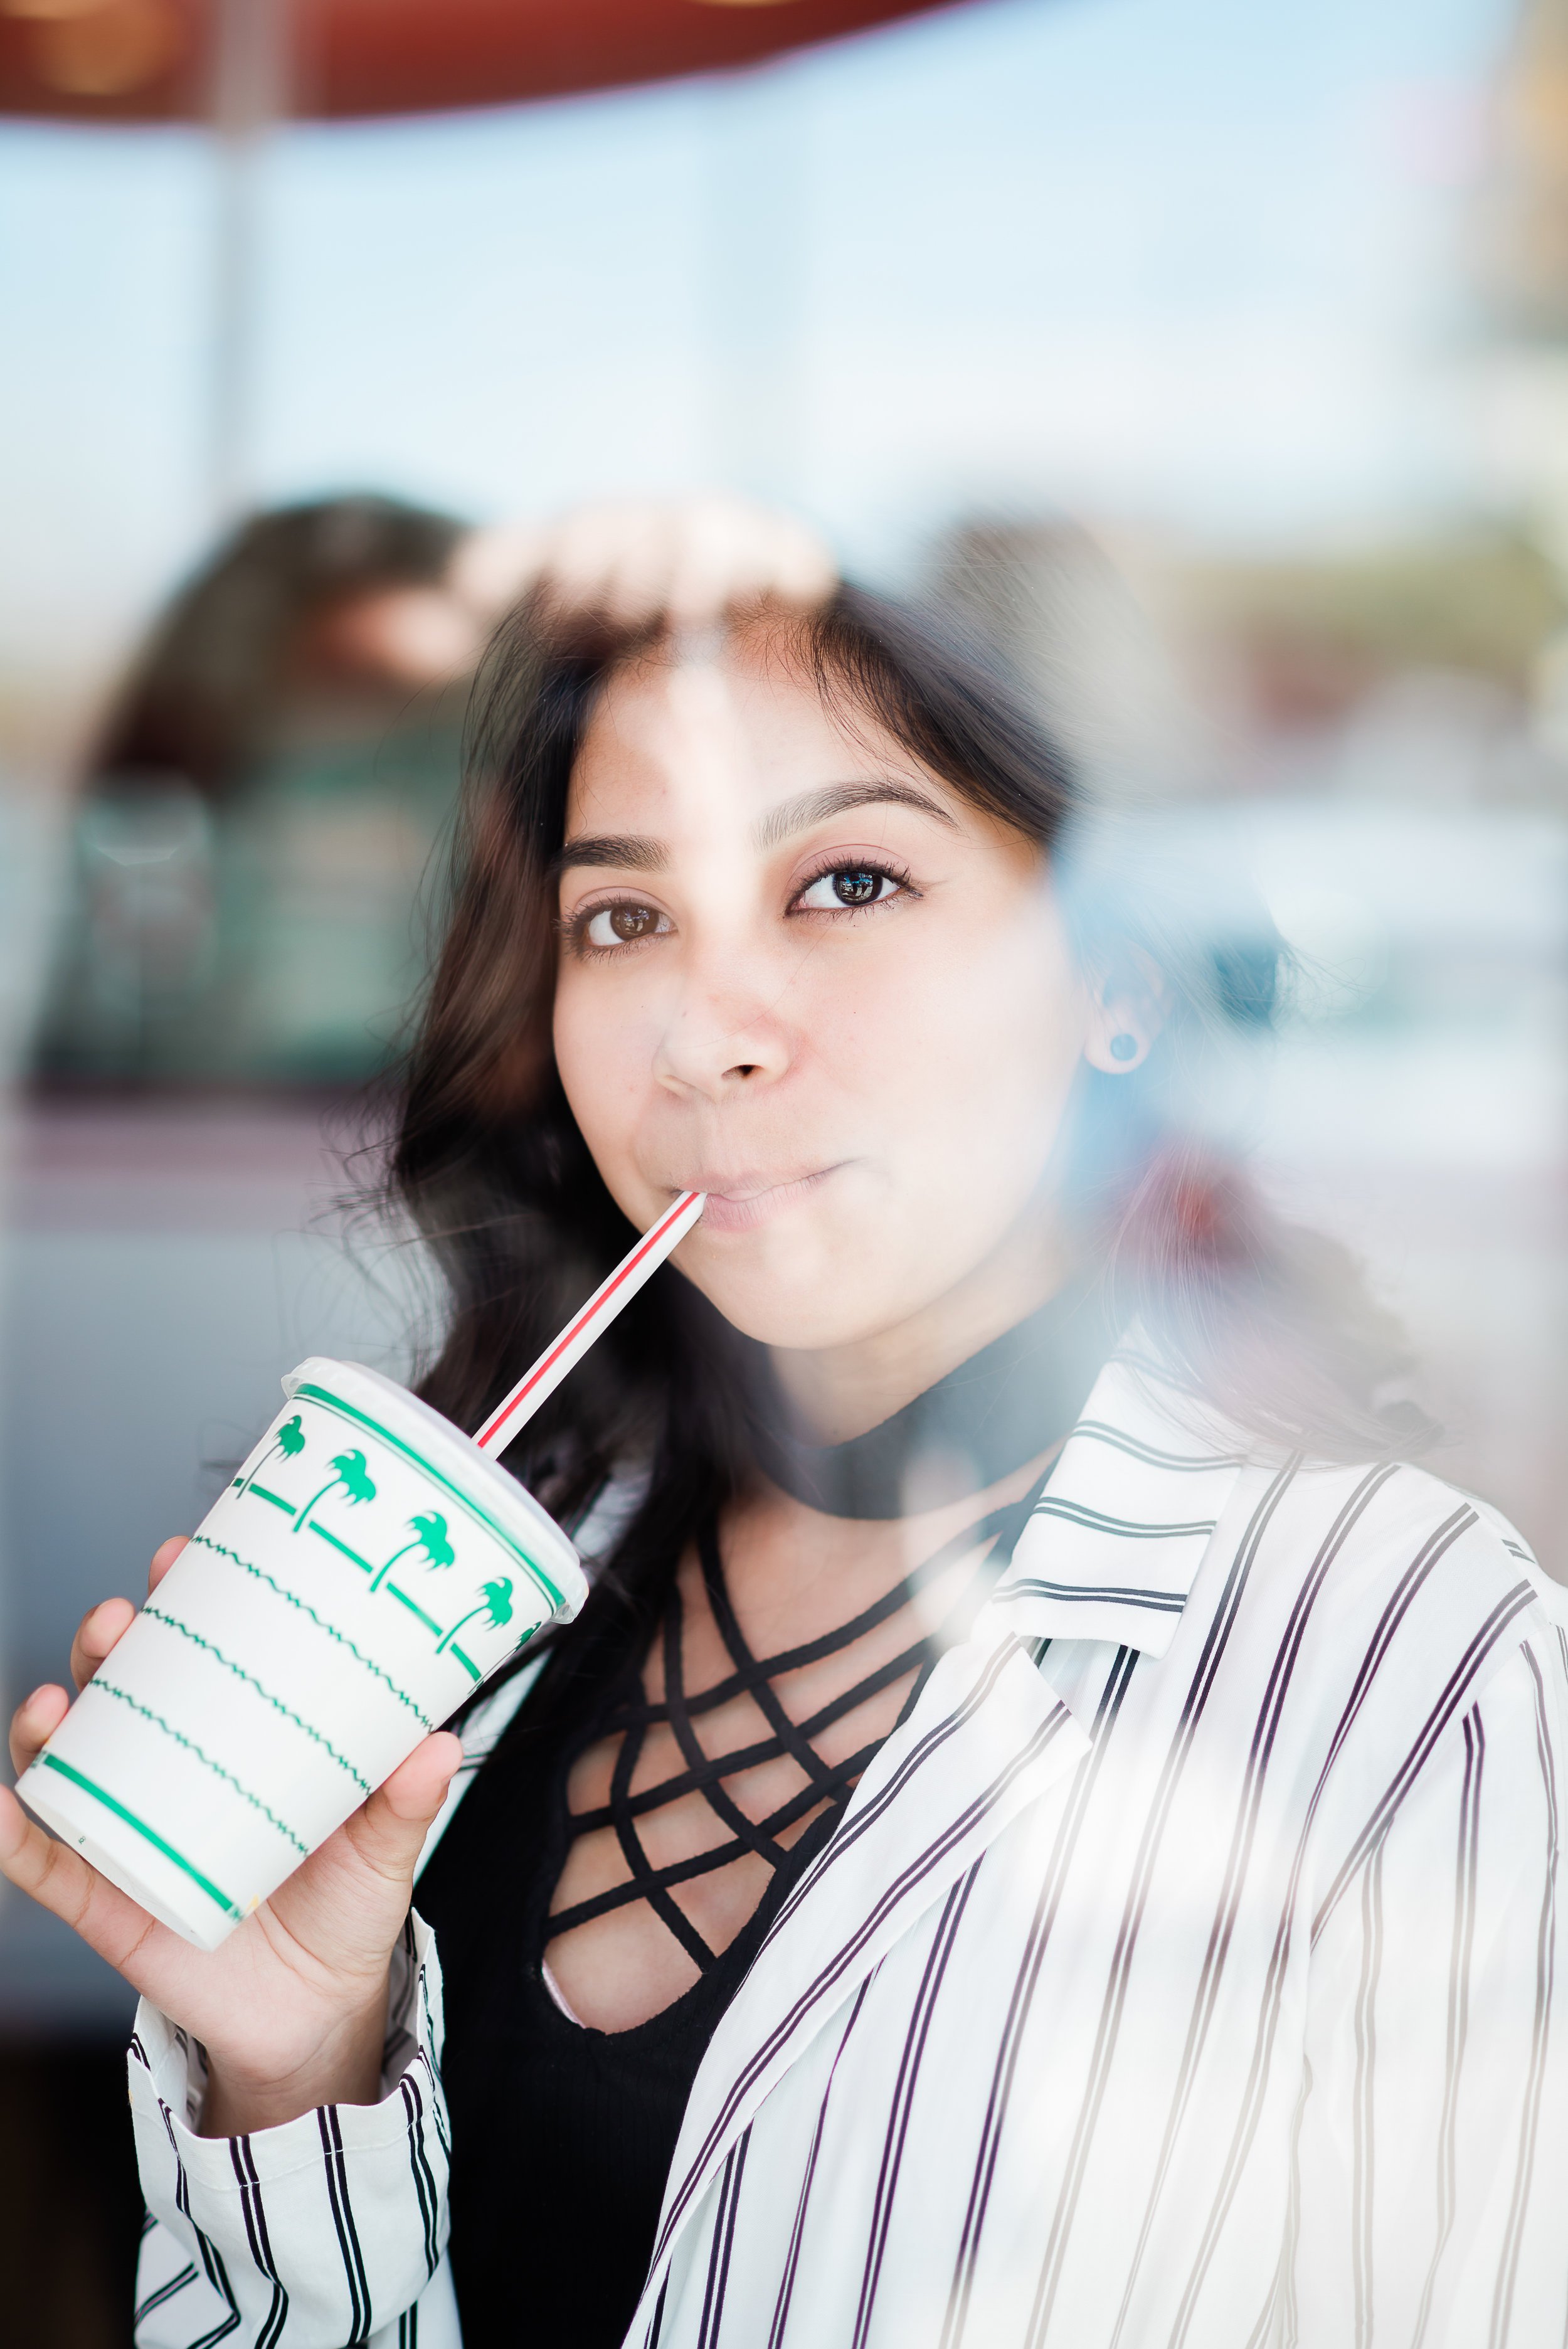 IN - N - OUT Photoshoot for Senior